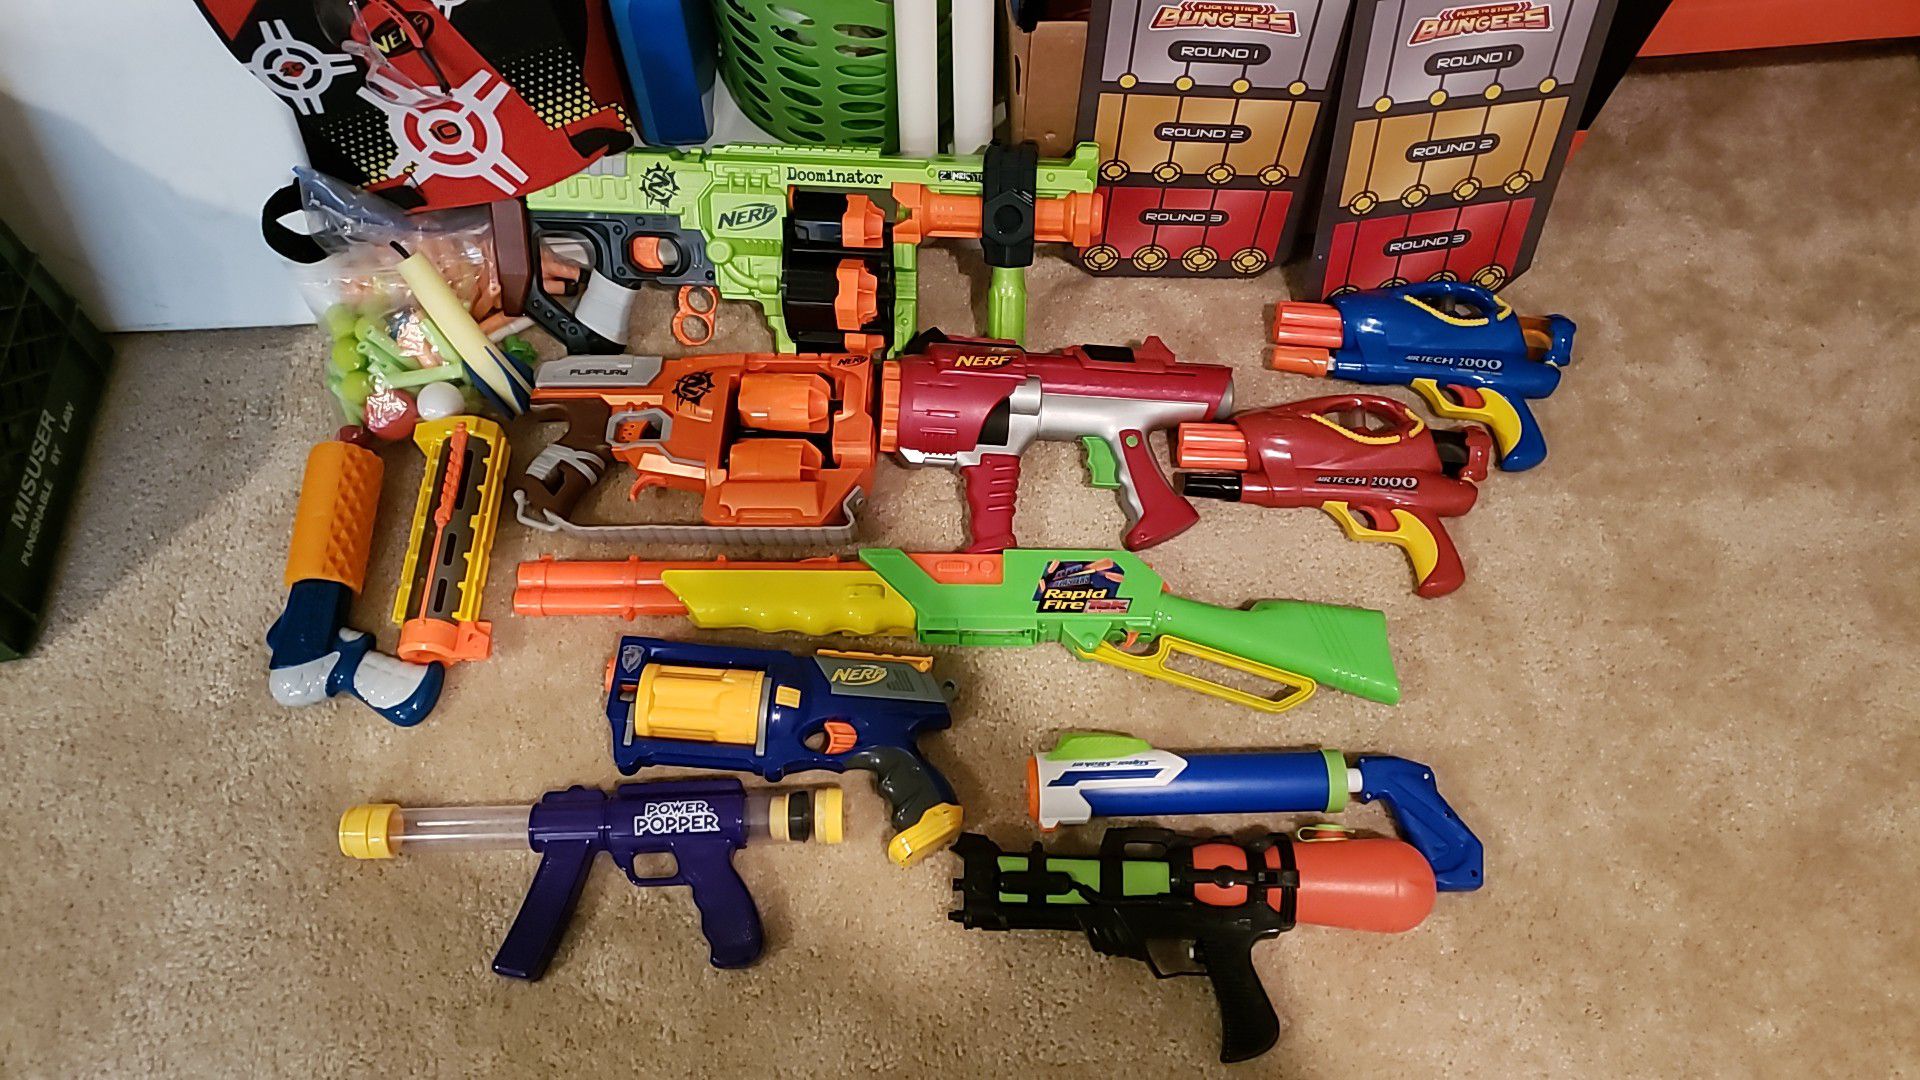 Lot of Nerf Guns and extras